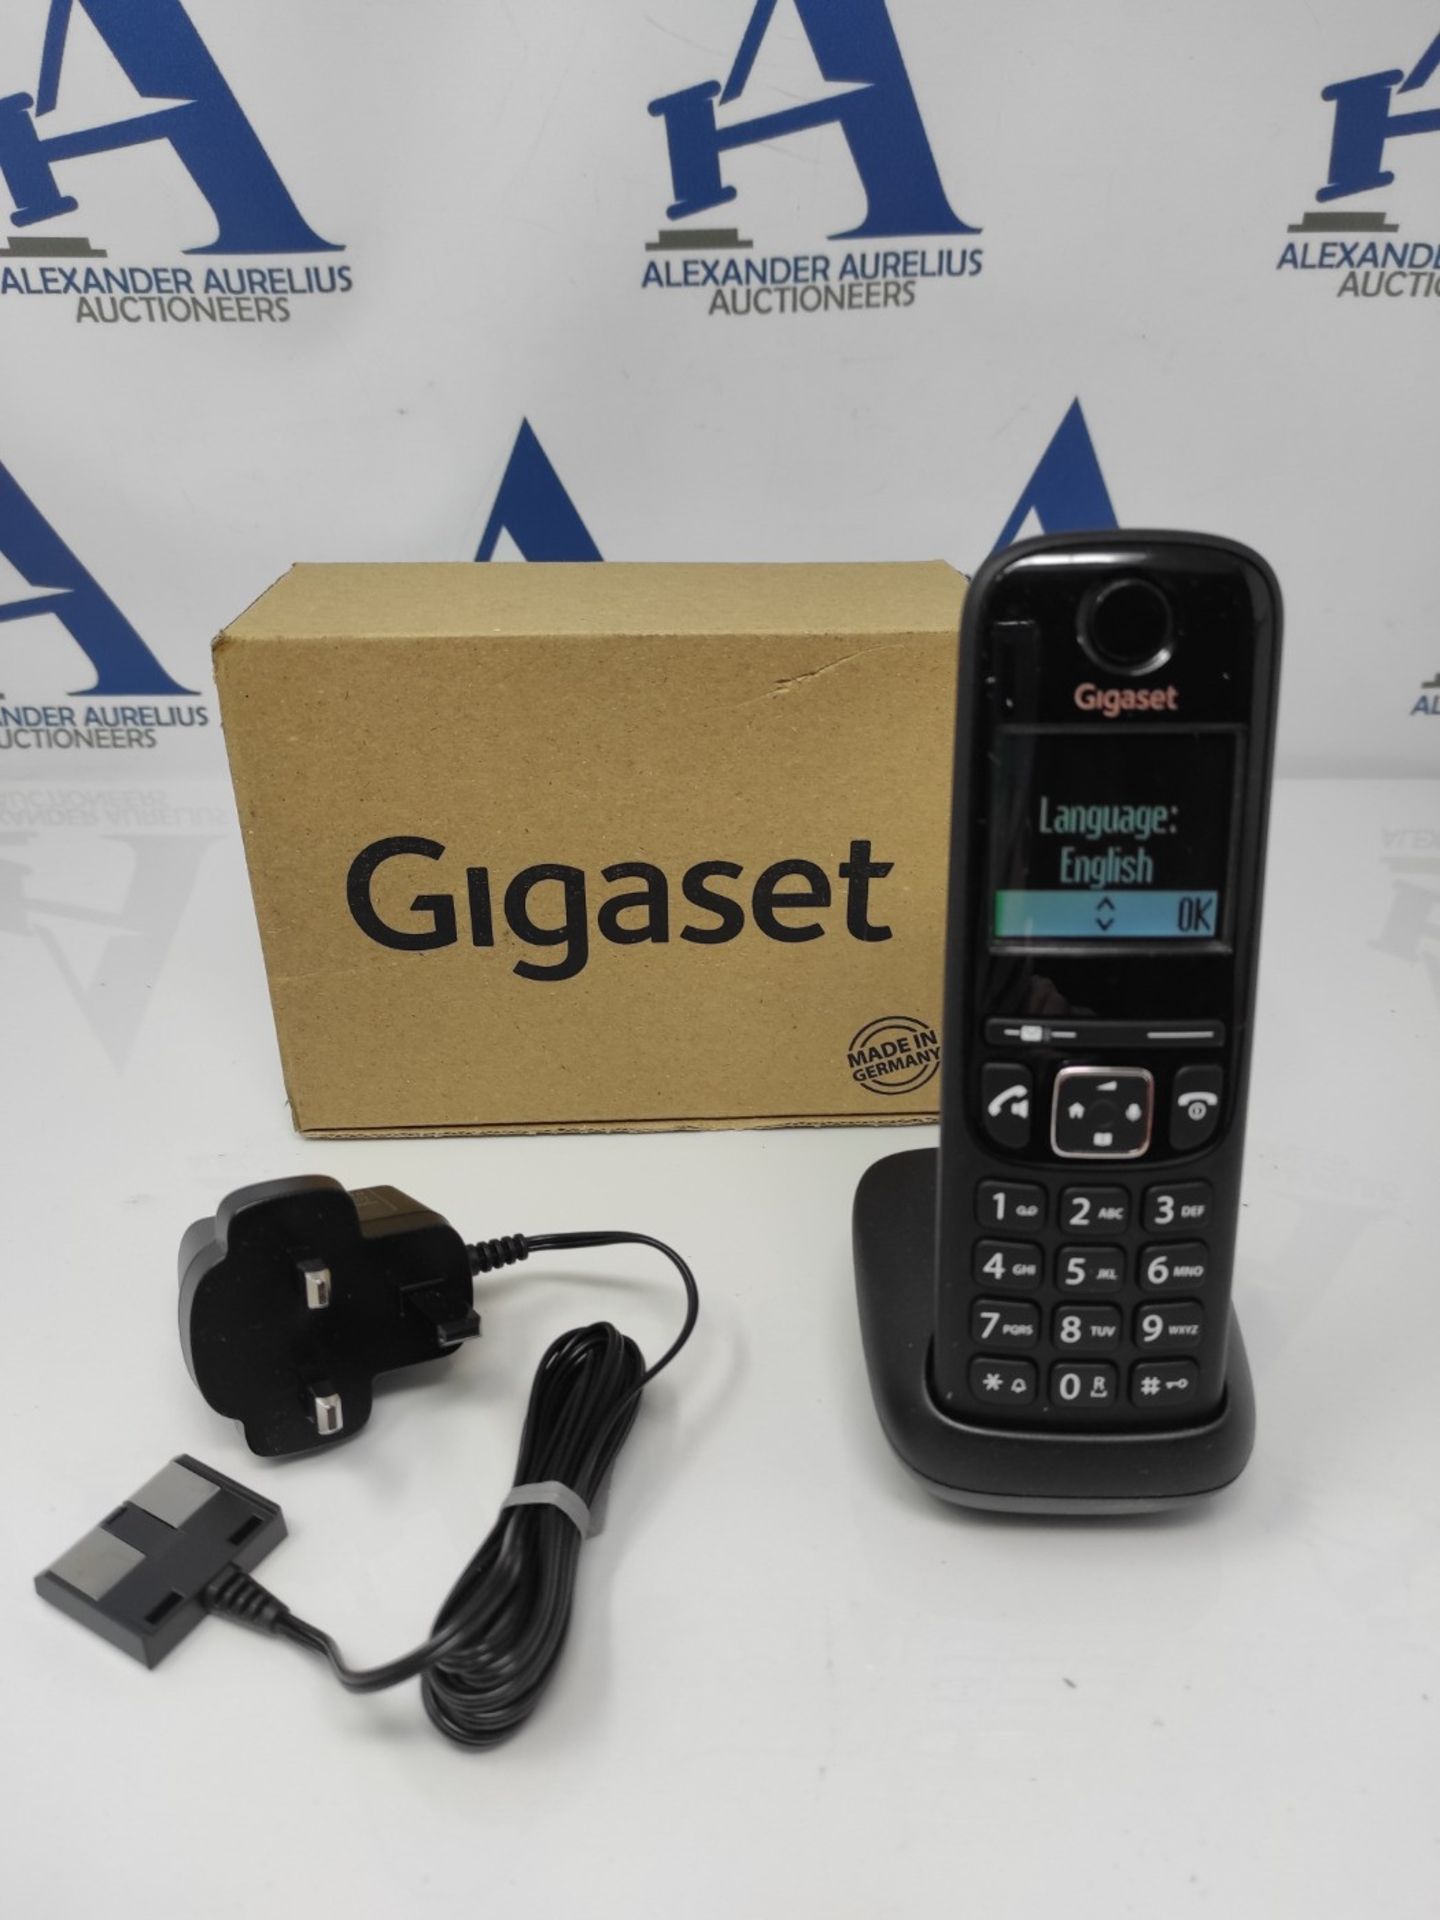 Gigaset ALLROUNDER 2,0 HX - Cordless phone for use with a DECT base station large, hig - Image 2 of 2